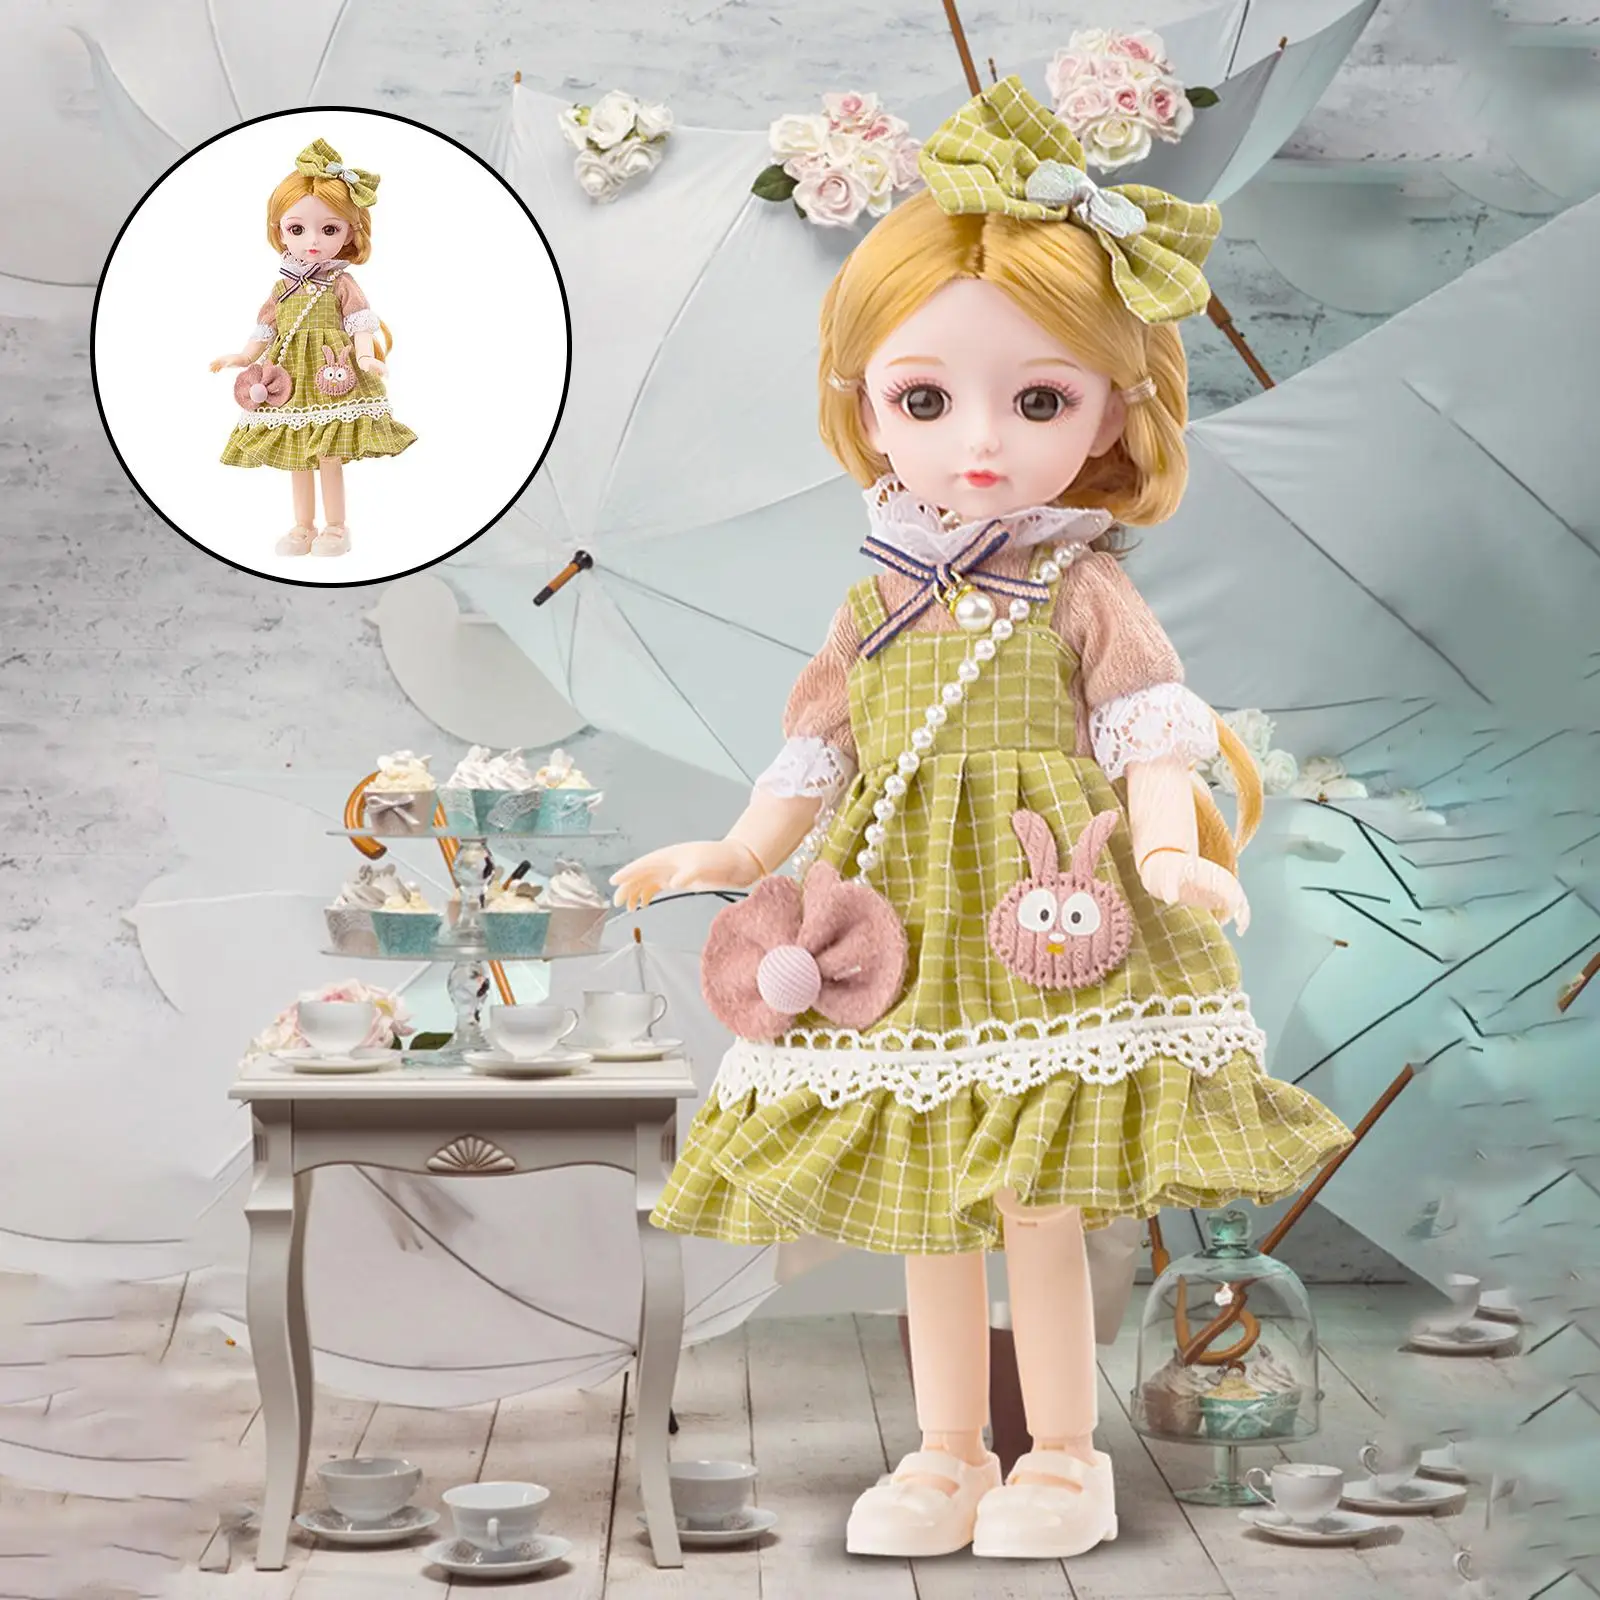 Adorable 13 Moveable Joint, 26cm  Doll with Dress  Full Set, Makeup  Doll, Ball Joint Doll Toys for Girls Collection